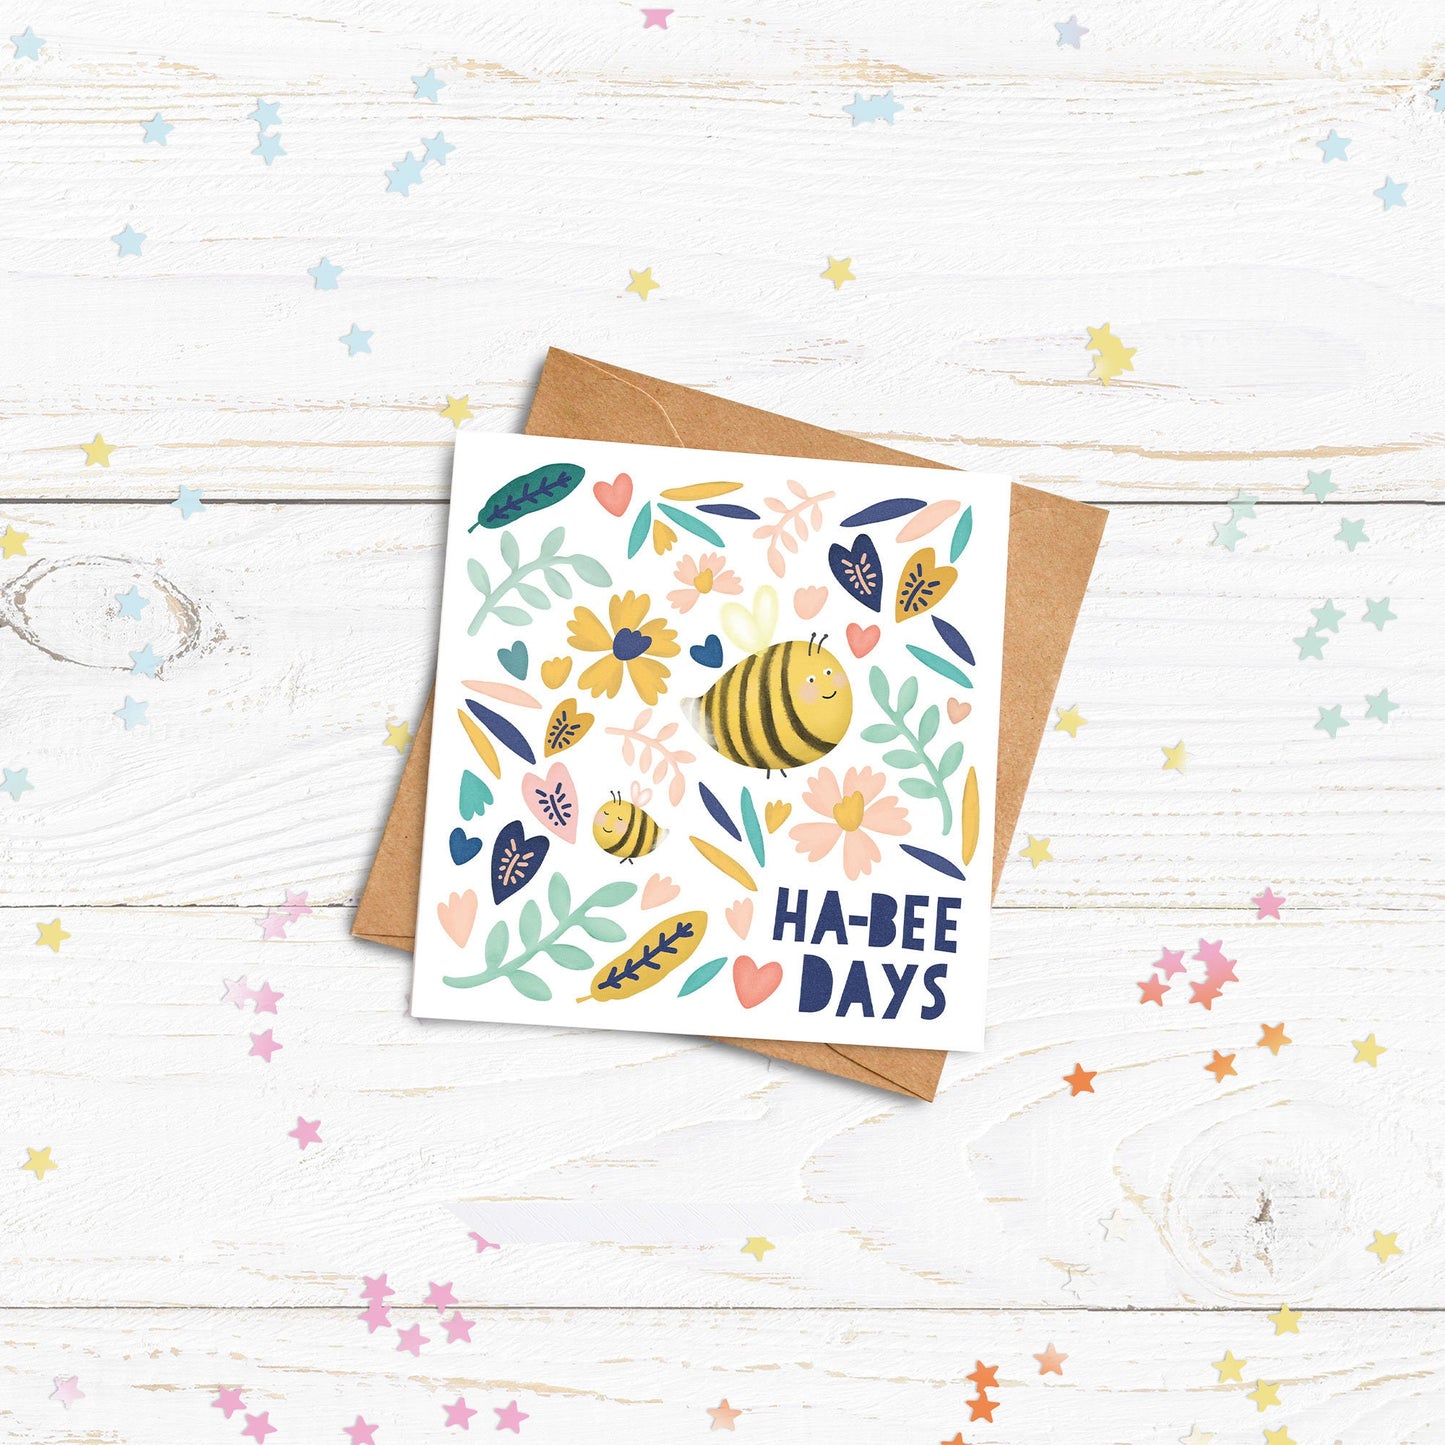 Mini Pack of Happiness - Ha Bee Days. Lockdown Cards. Pack of Cards. Happy Birthday Cards.